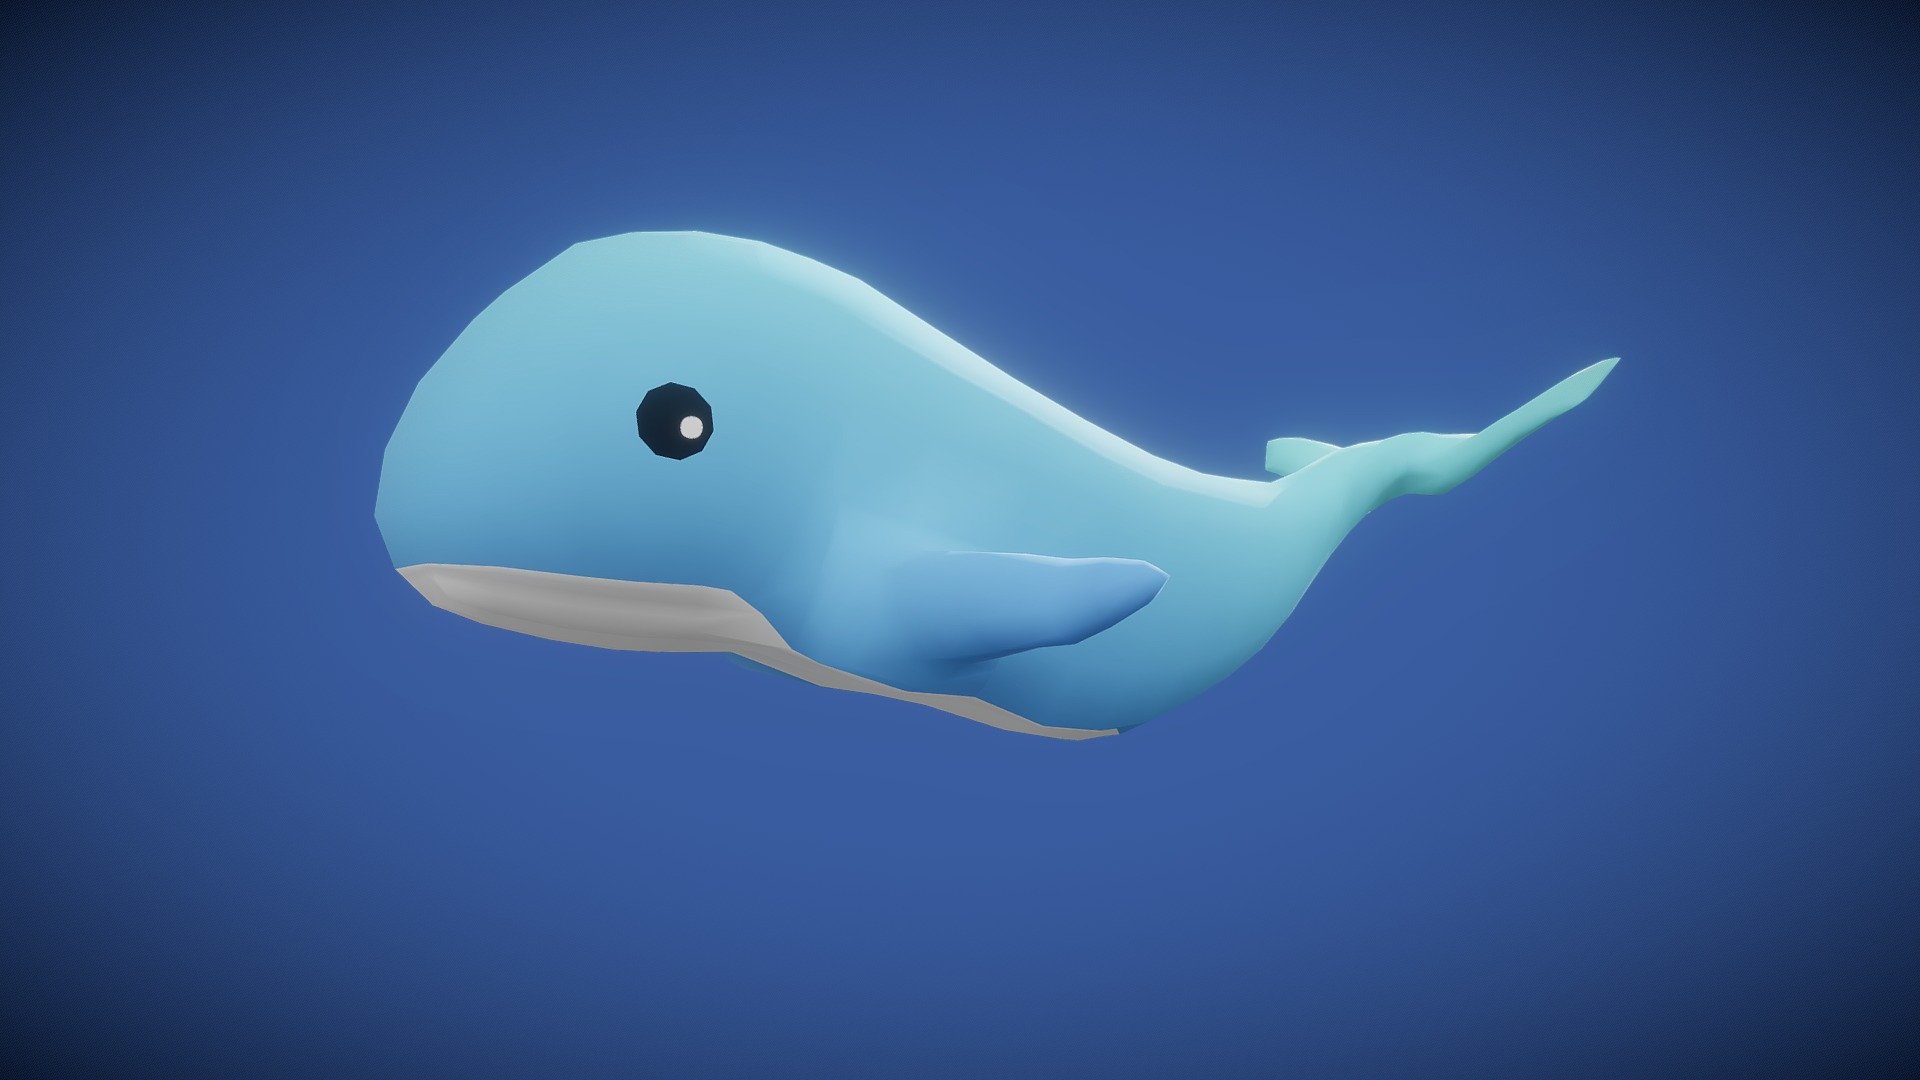 Animated Whale🐳


1 looping idle animation

1 looping run animation

1 dying animation

1 blinking blendshape
Made with Blender, Gimp and Subtance painter

If you have any questions, contact me! - Cartoon Whale - 3D model by Blue Colossus Studio (@BlueColossus) 3d model